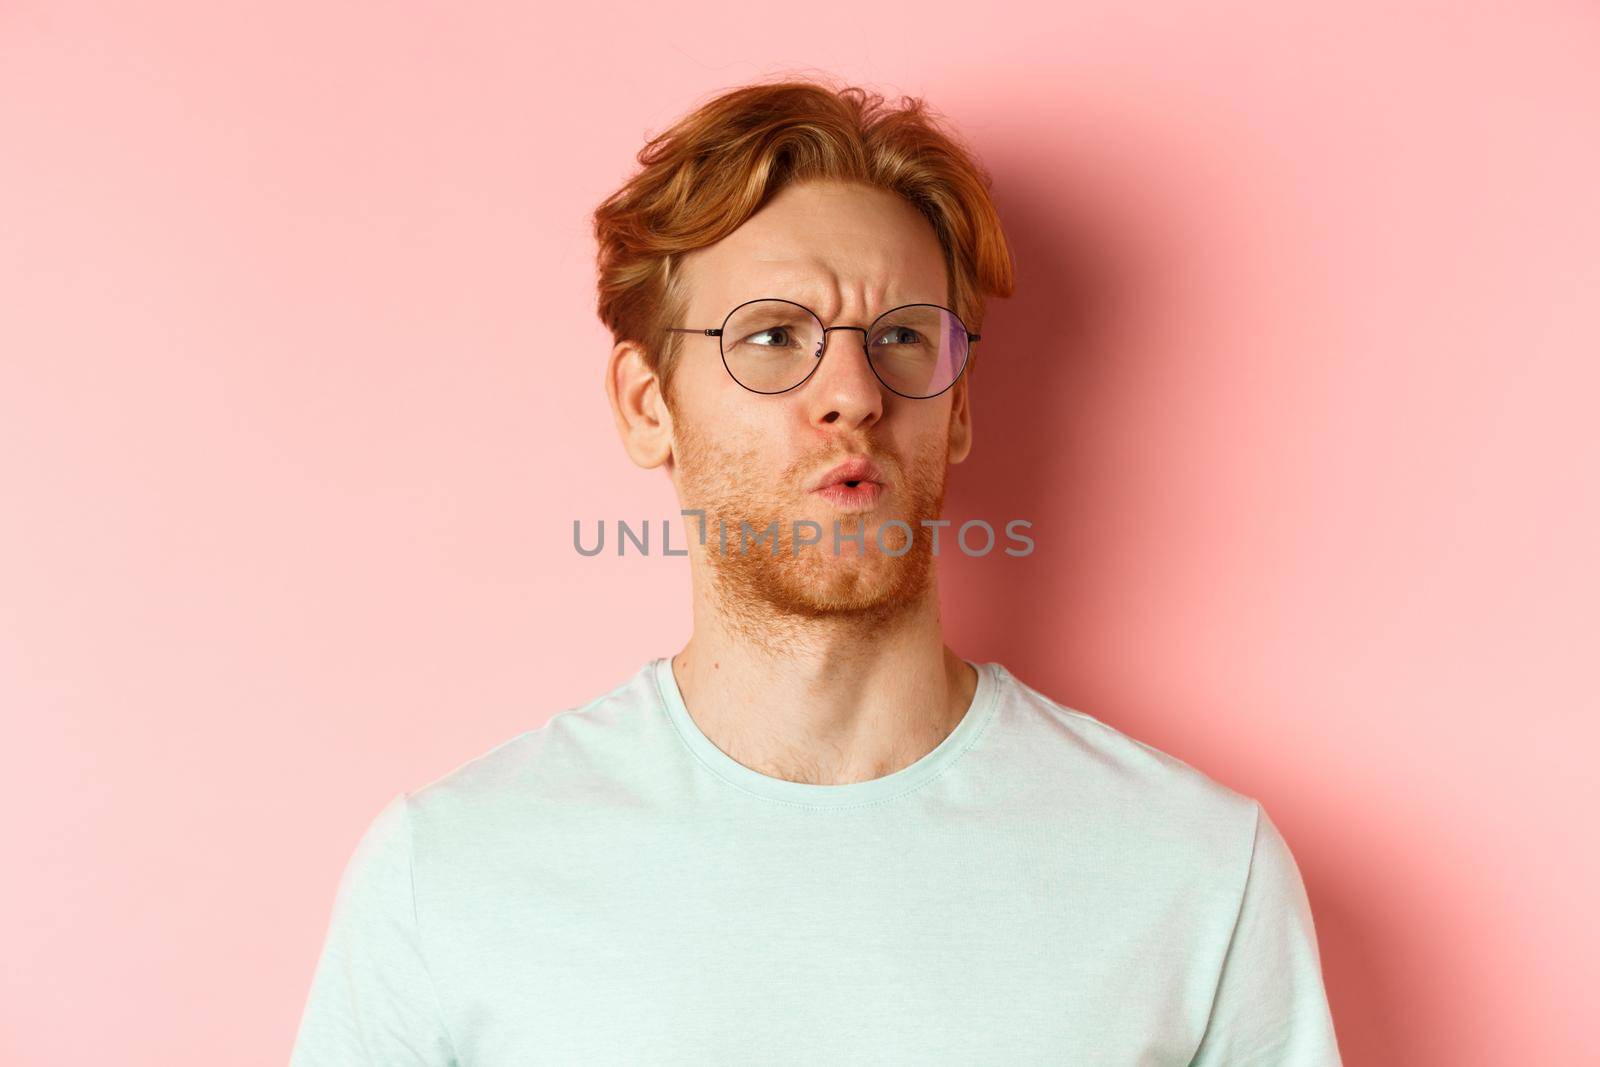 Ouch thats bad. Face of redhead man showing pity and feeling sorry for someone, frowning and looking with compassion, standing over pink background.